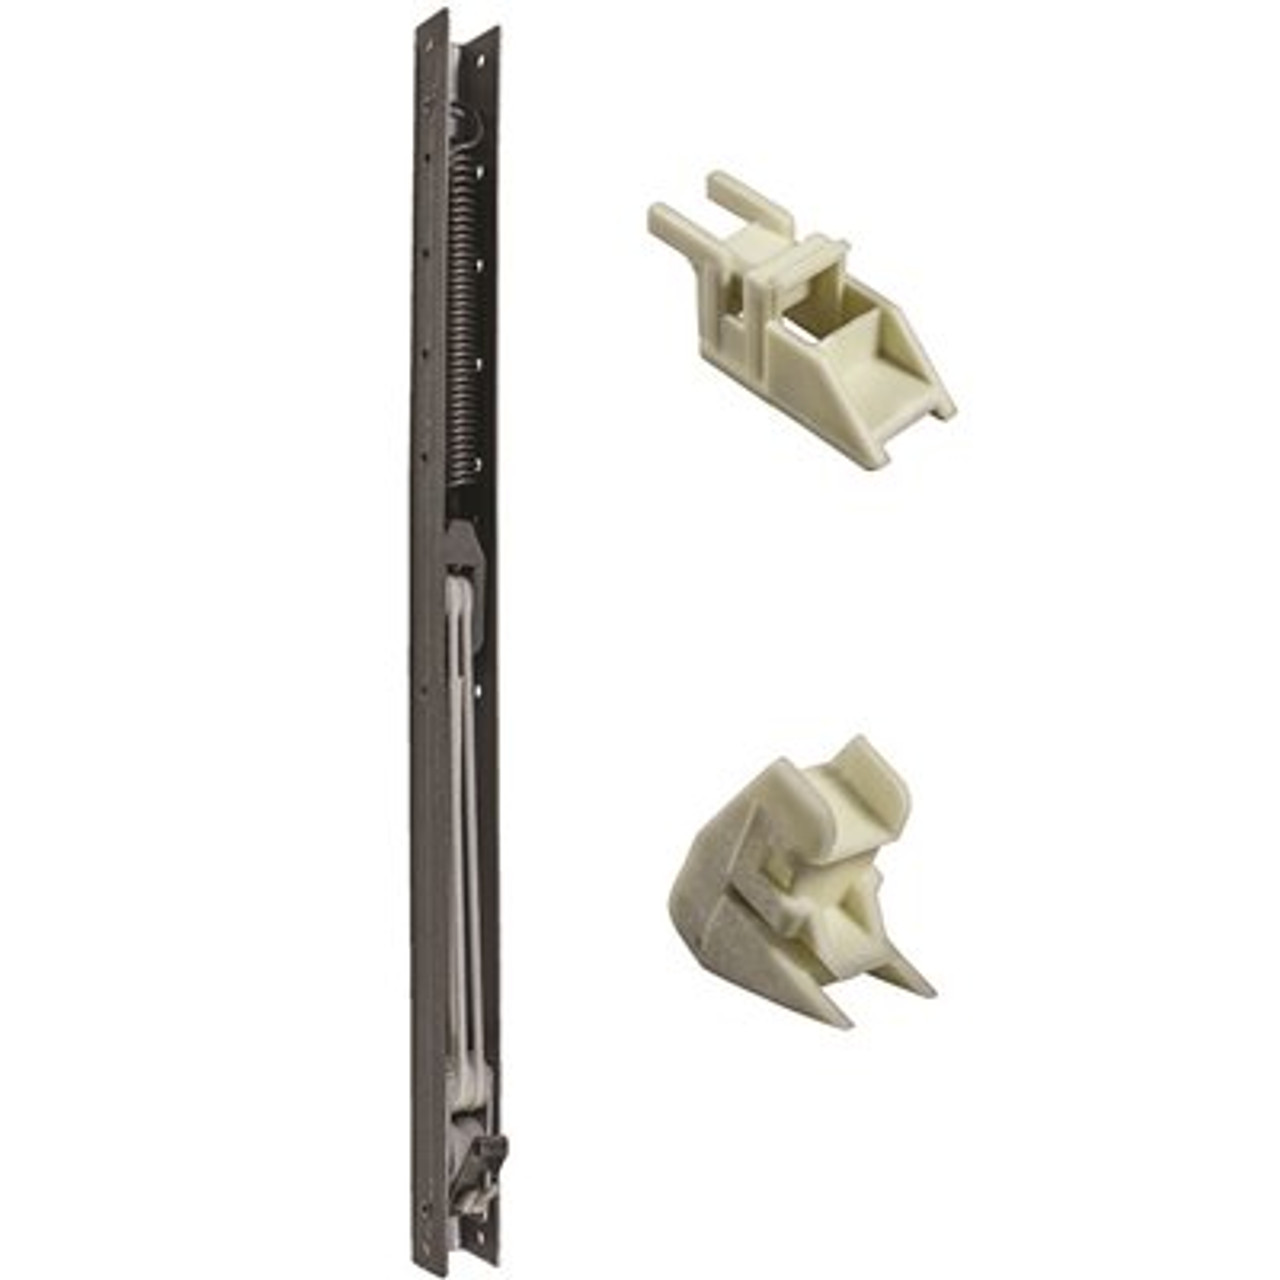 17 In. L Window Channel Balance 1610 With 9/16 In. W X 5/8 In. D Top And Bottom End Brackets Attached - 314413210